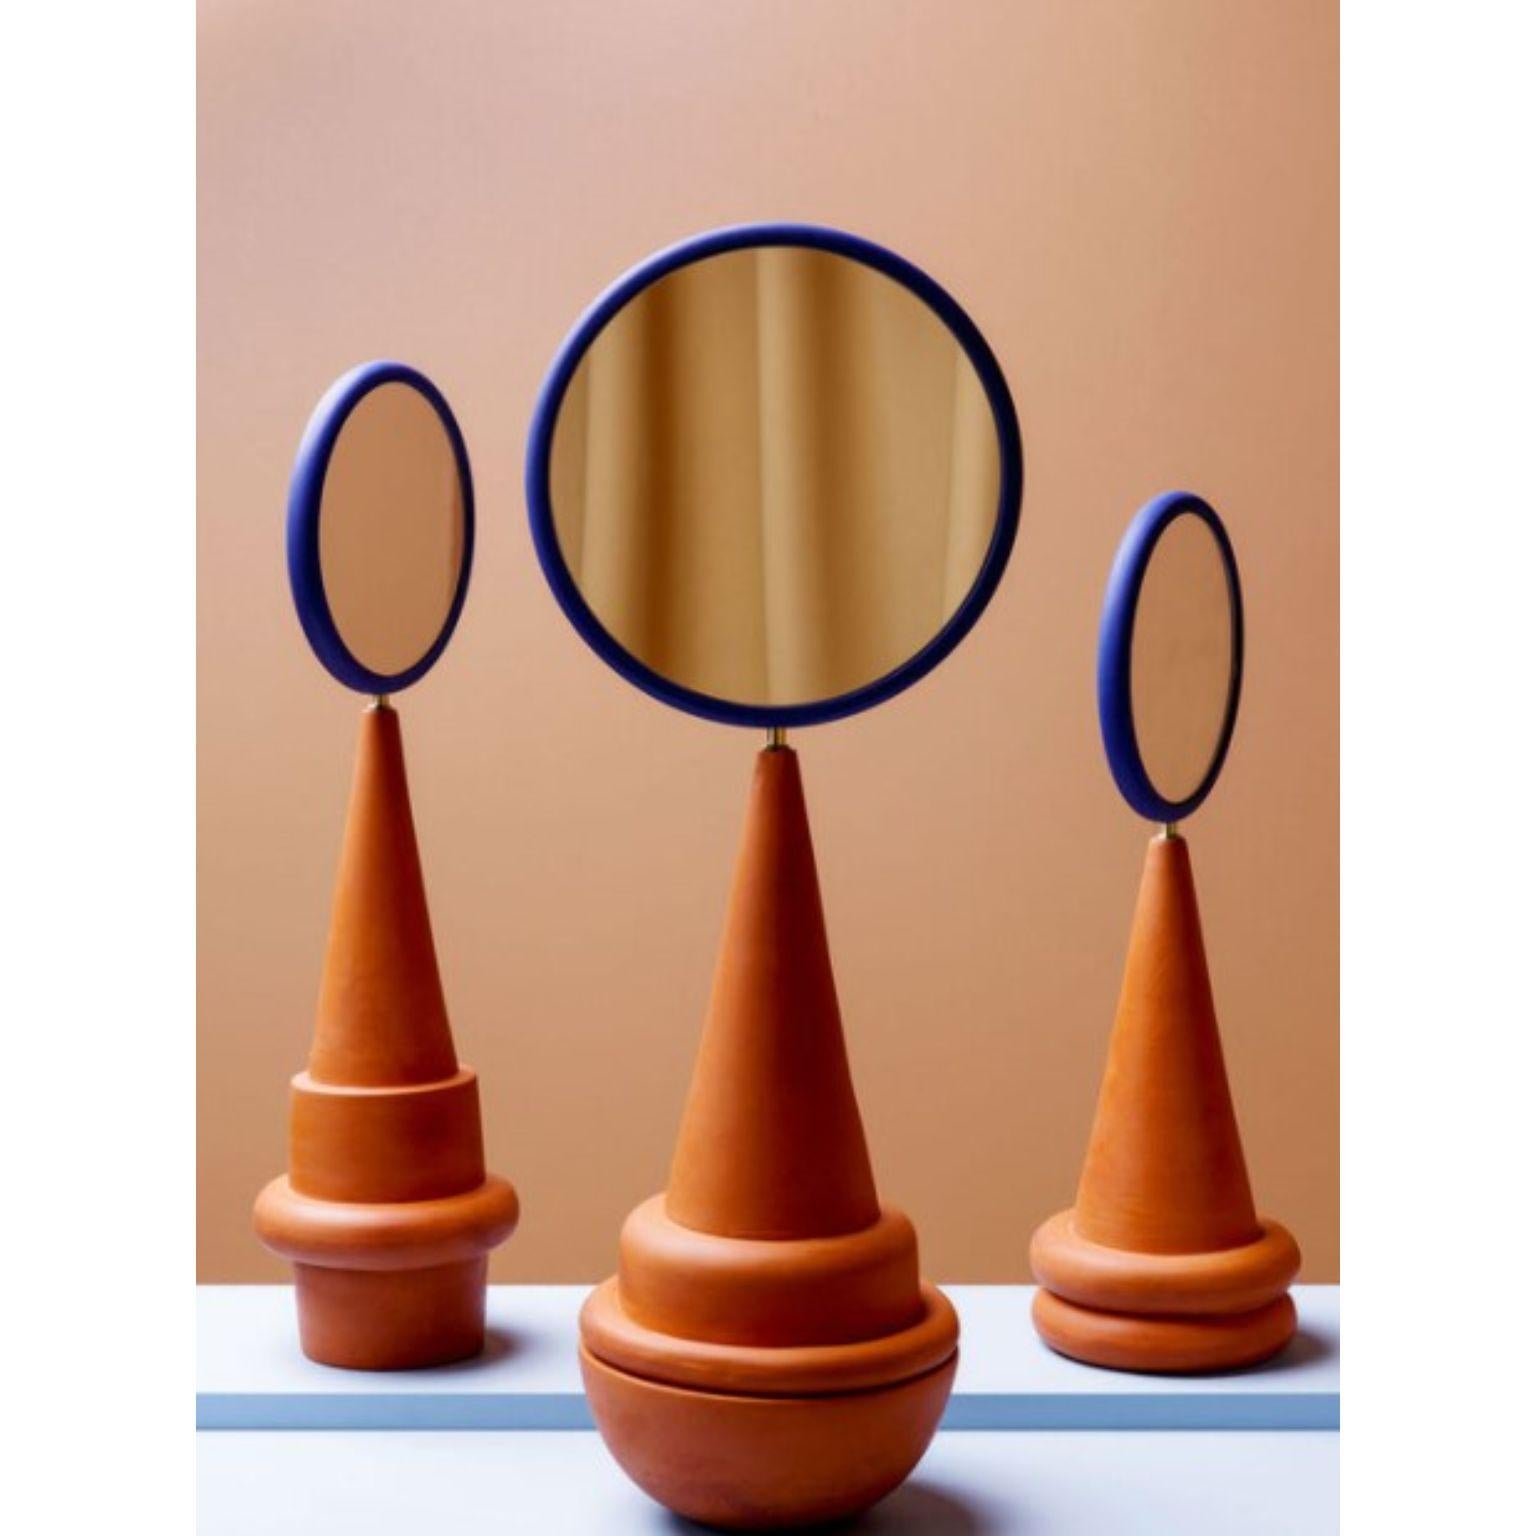 Set of 3 Marrakesh table mirrors by Tero KuitunenMaterial: slip cast terracotta, Mdf, chalk paint, mirror, brass.
Dimensions: D30 x H58 cm, D20 x 53cm , D20 x H40 cm
Edition of 8
Also Available : different colours (Blue,Brown) and different